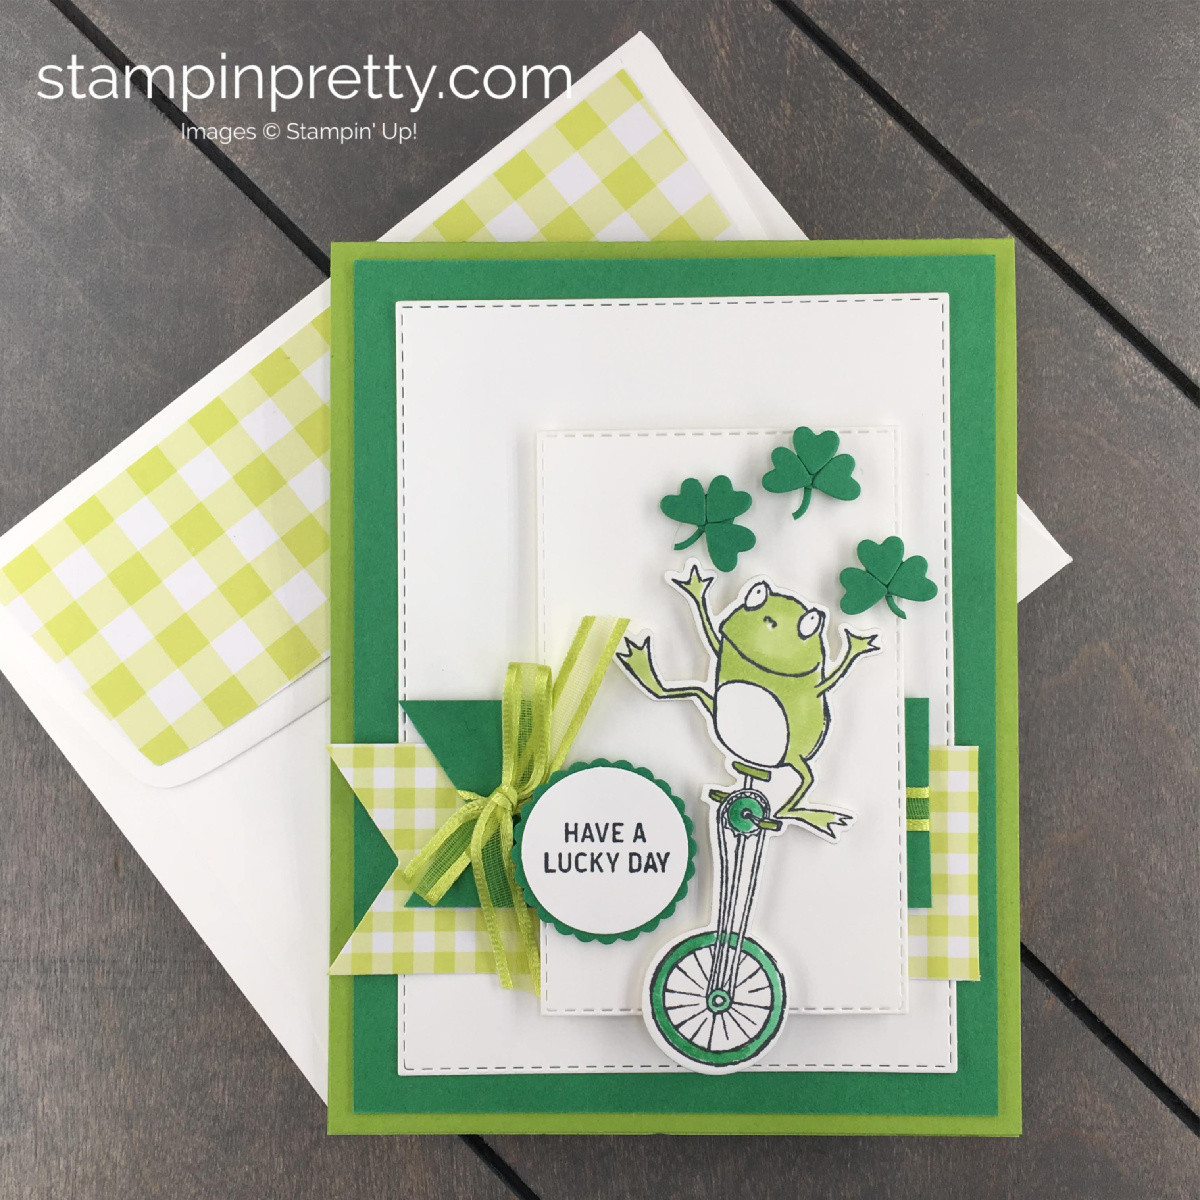 St Patrick's Day Card Ideas
 More Holiday Cards & Ideas Archives